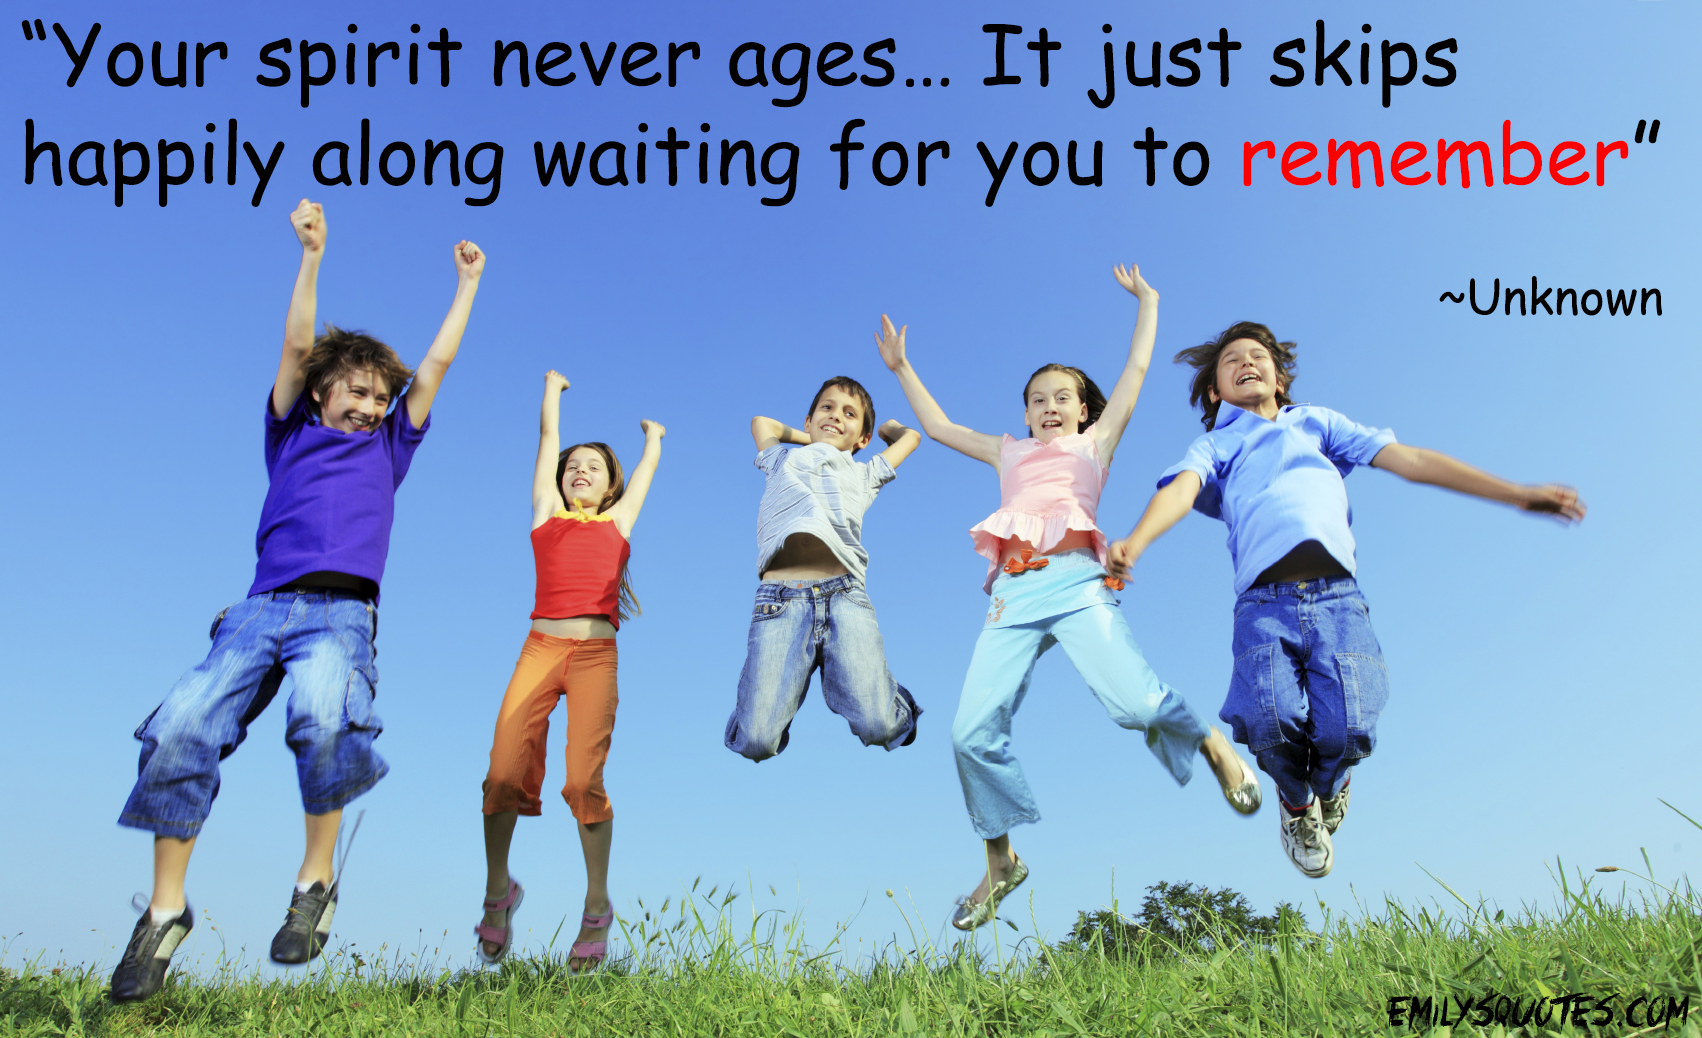 Your spirit never ages… It just skips happily along waiting for you to remember